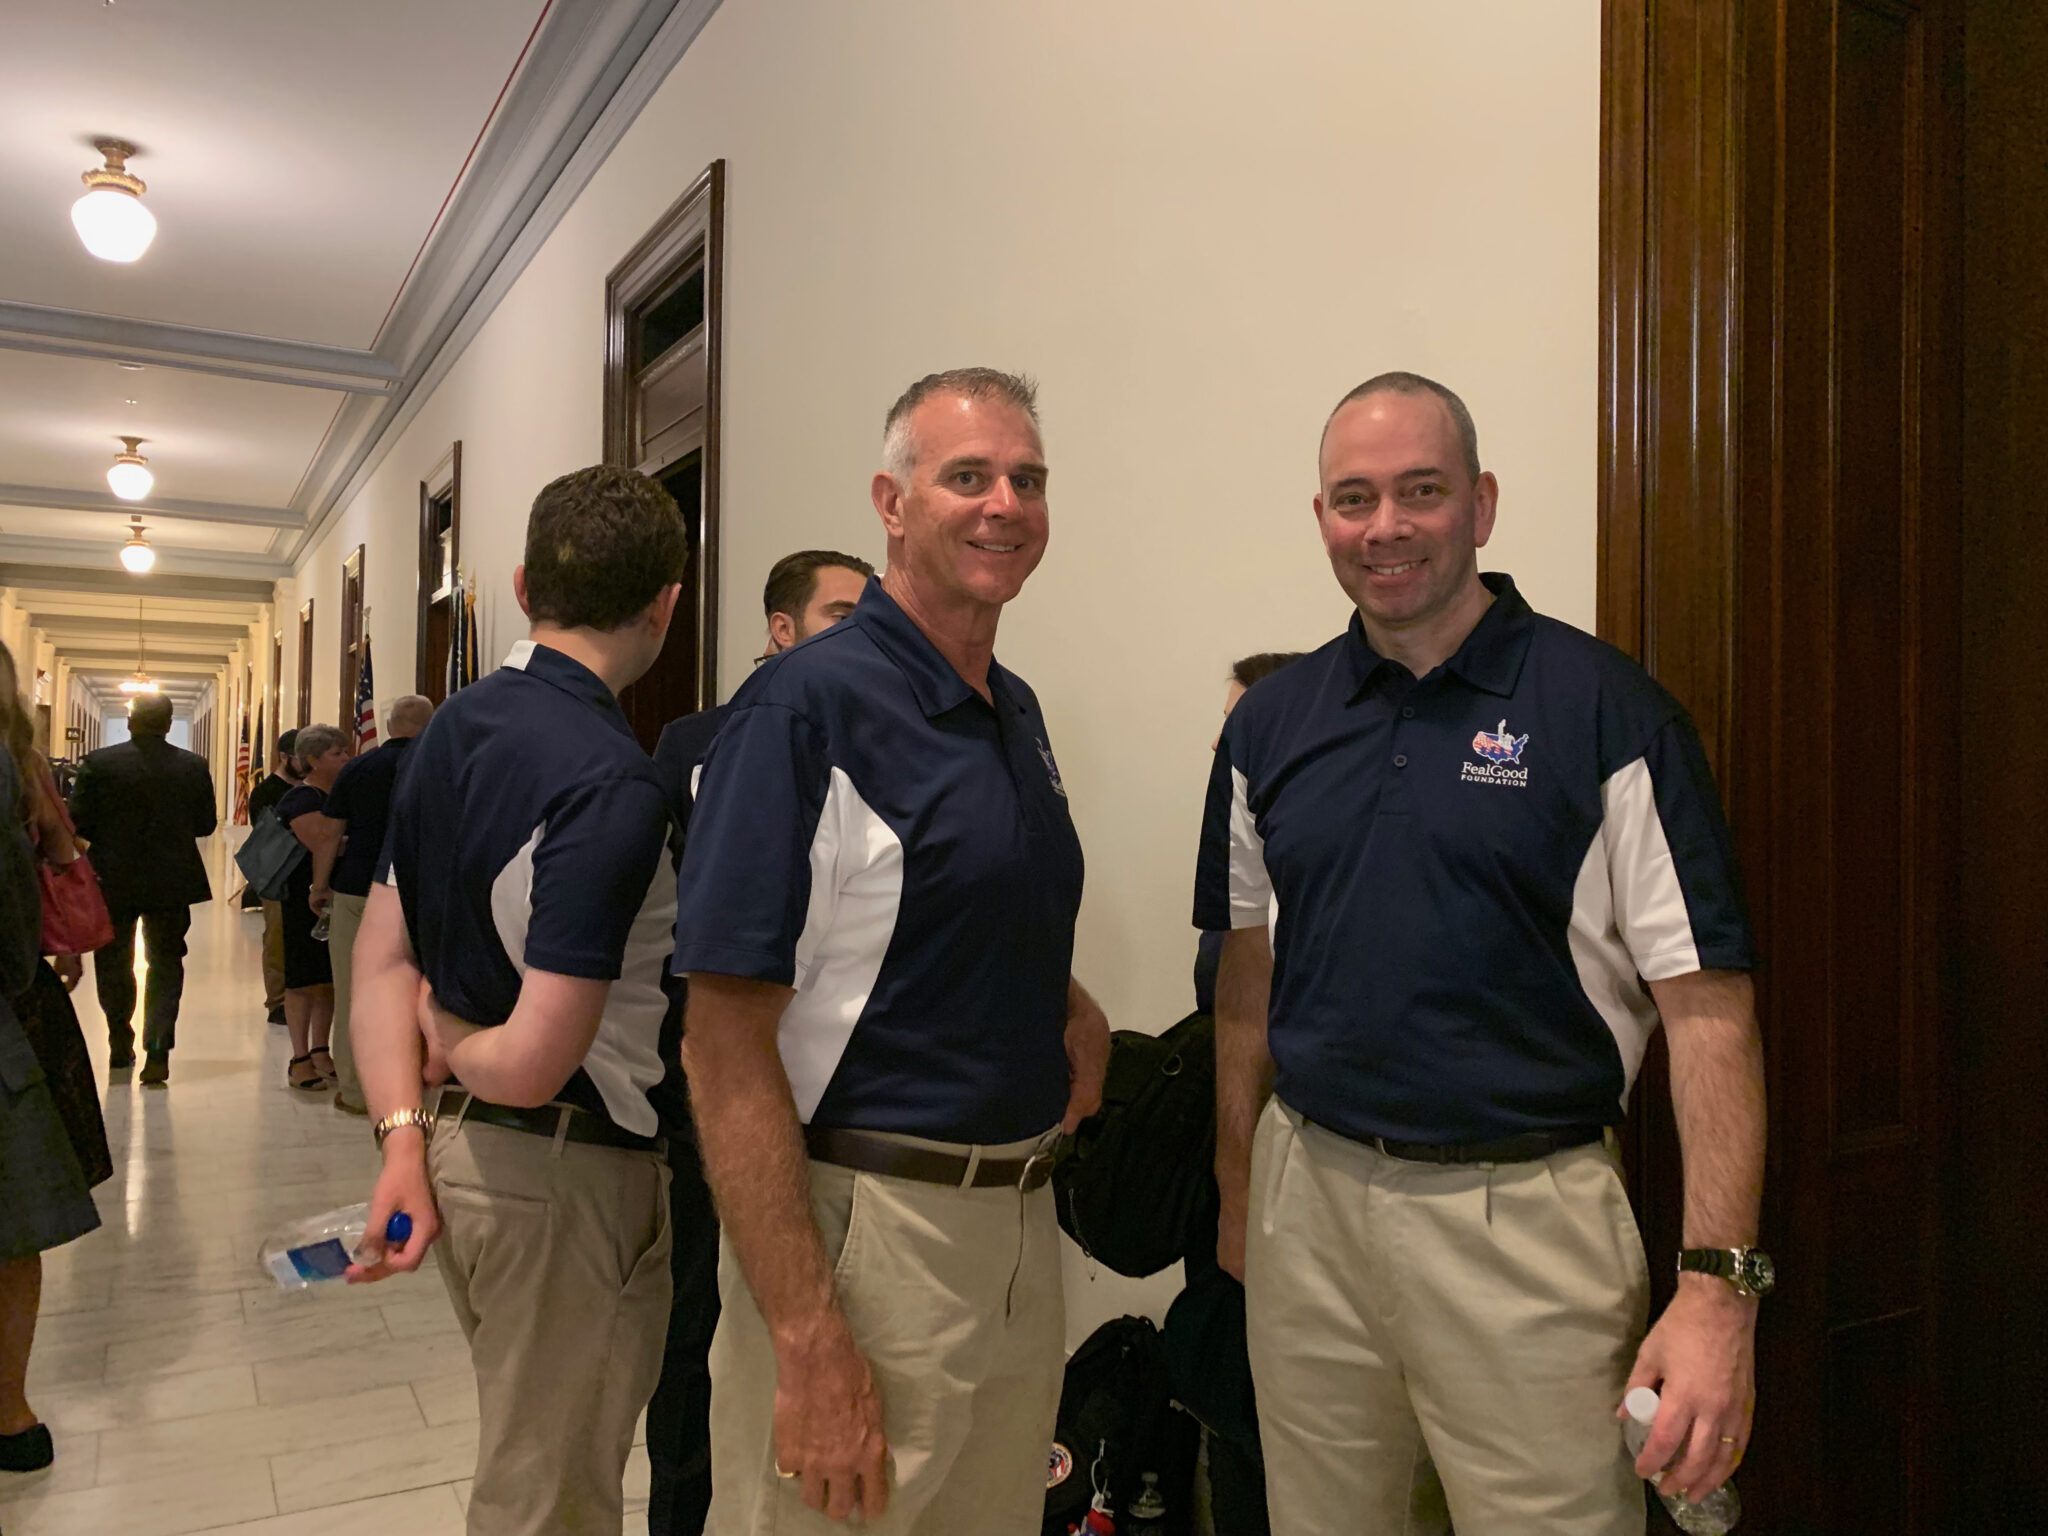 9-11 first responders lobbying in the U.S. Capitol